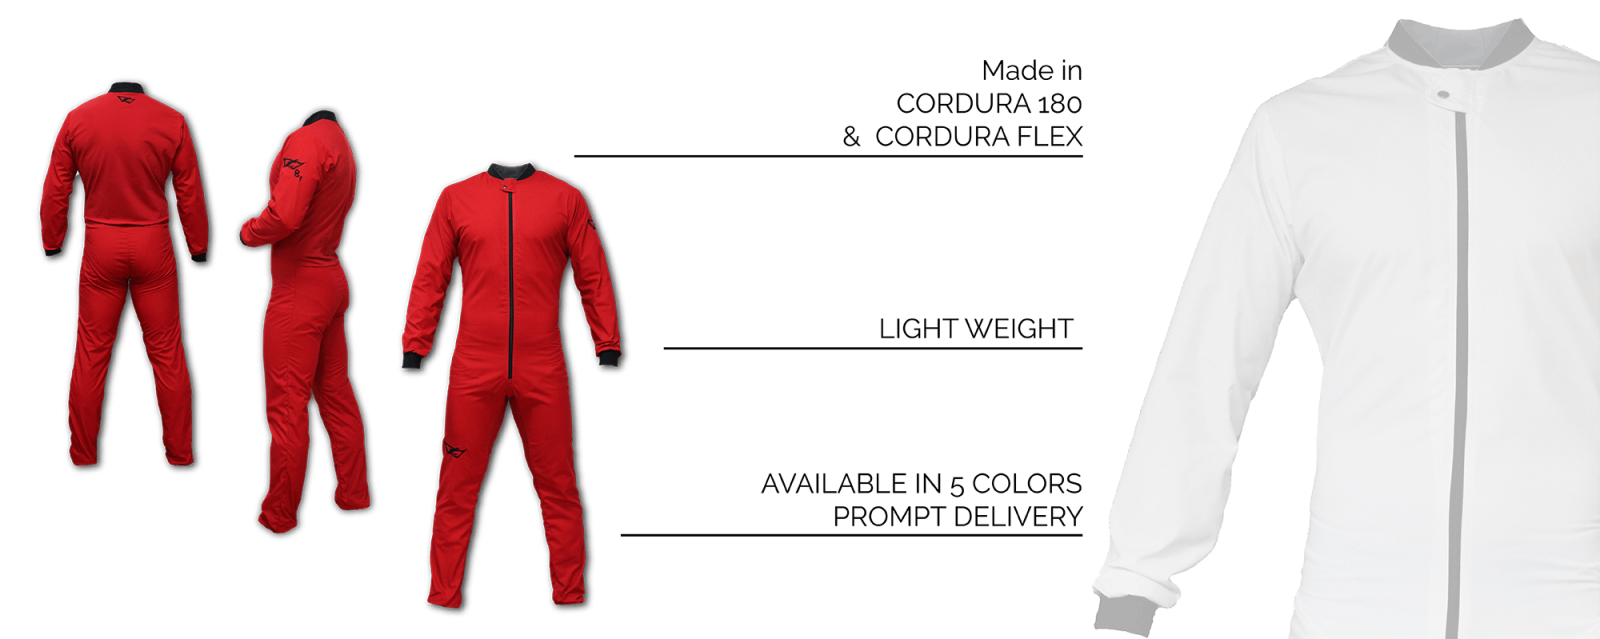 Discover 149+ skydiving jumpsuits for sale best